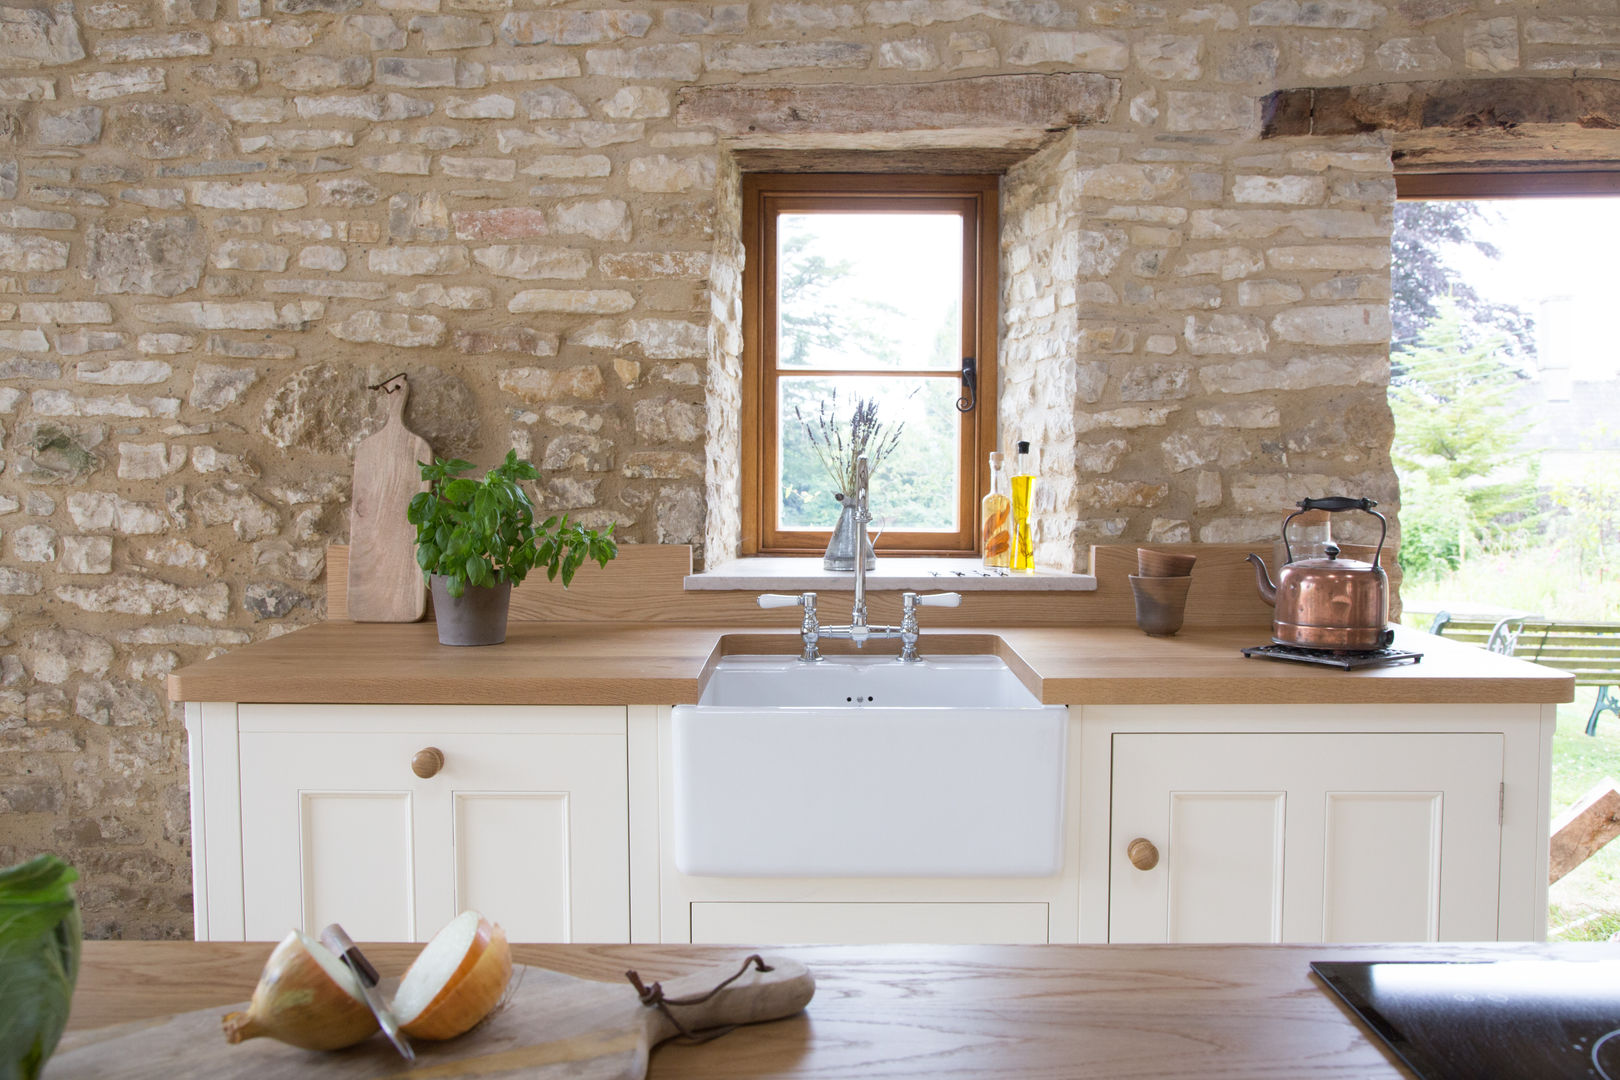 A Traditional Country Kitchen homify Country style kitchen